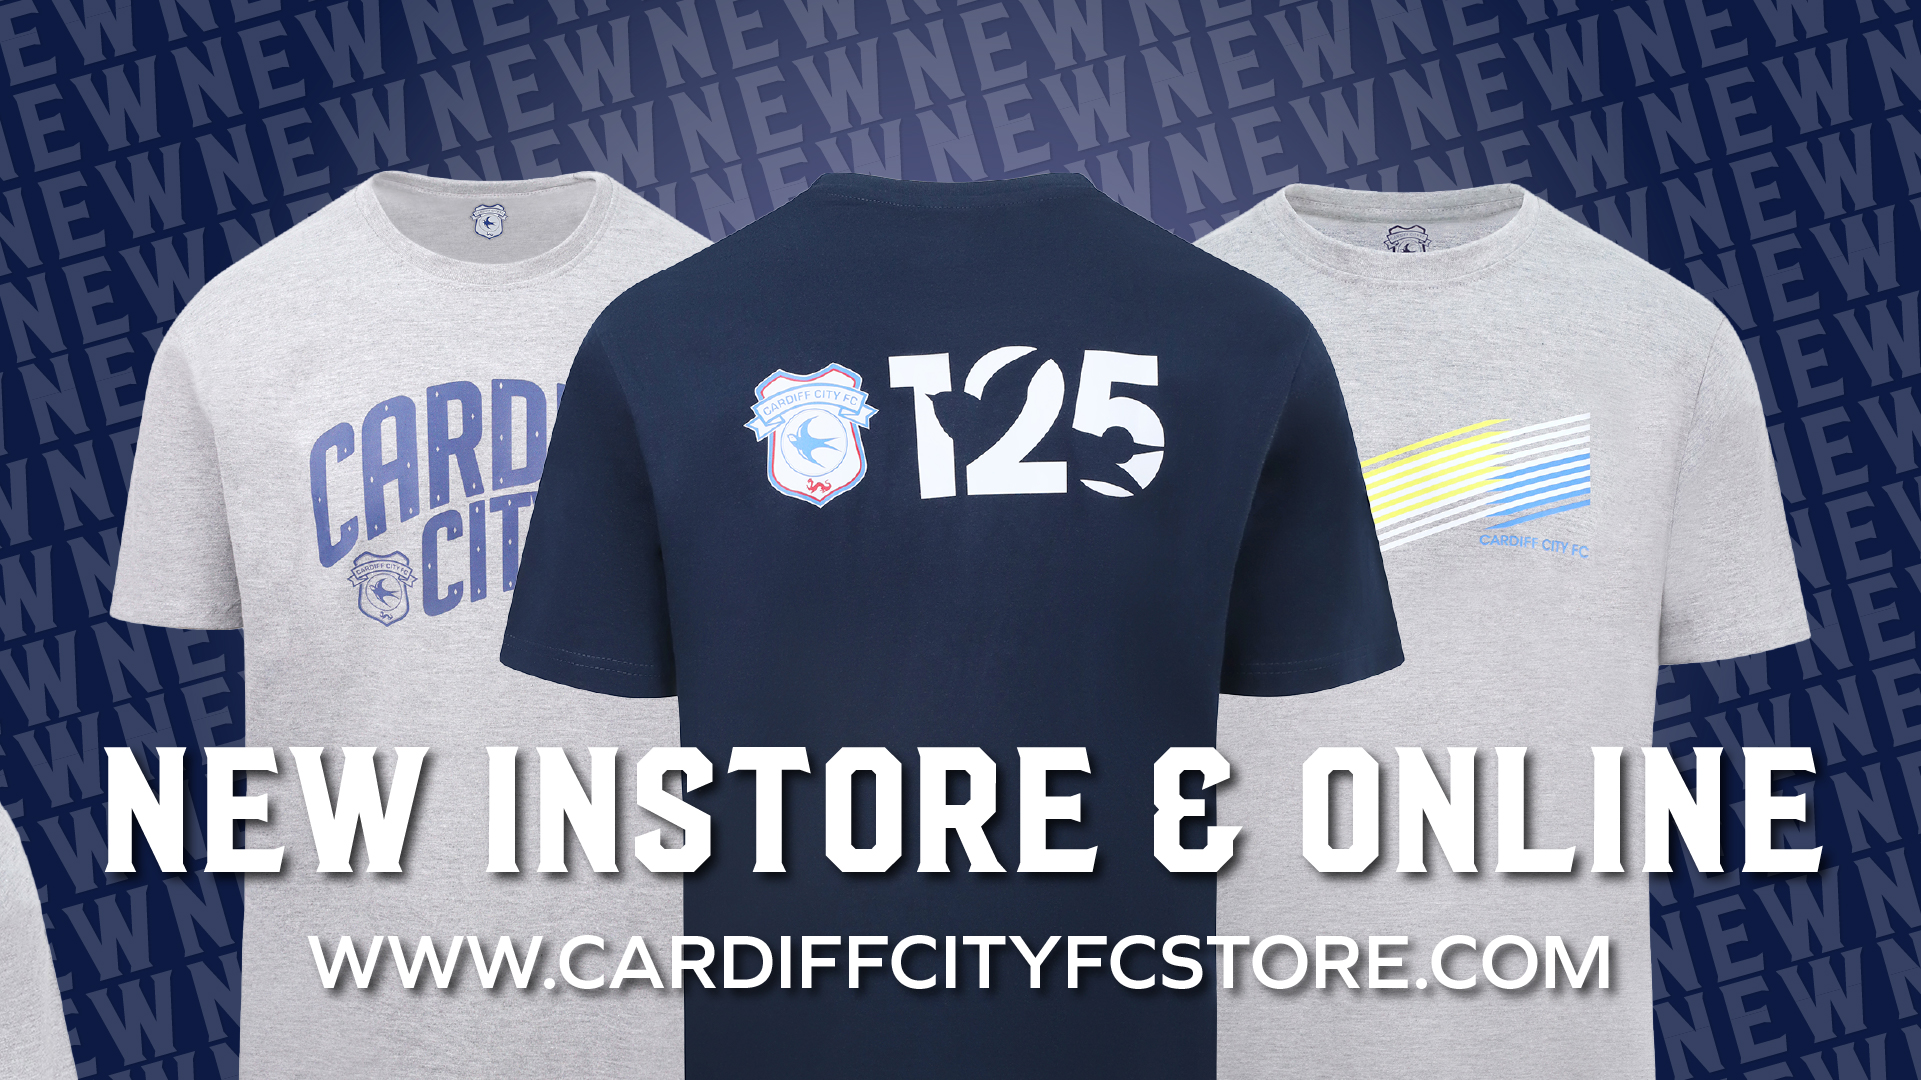 Cardiff City FC Superstore - new items on sale now!